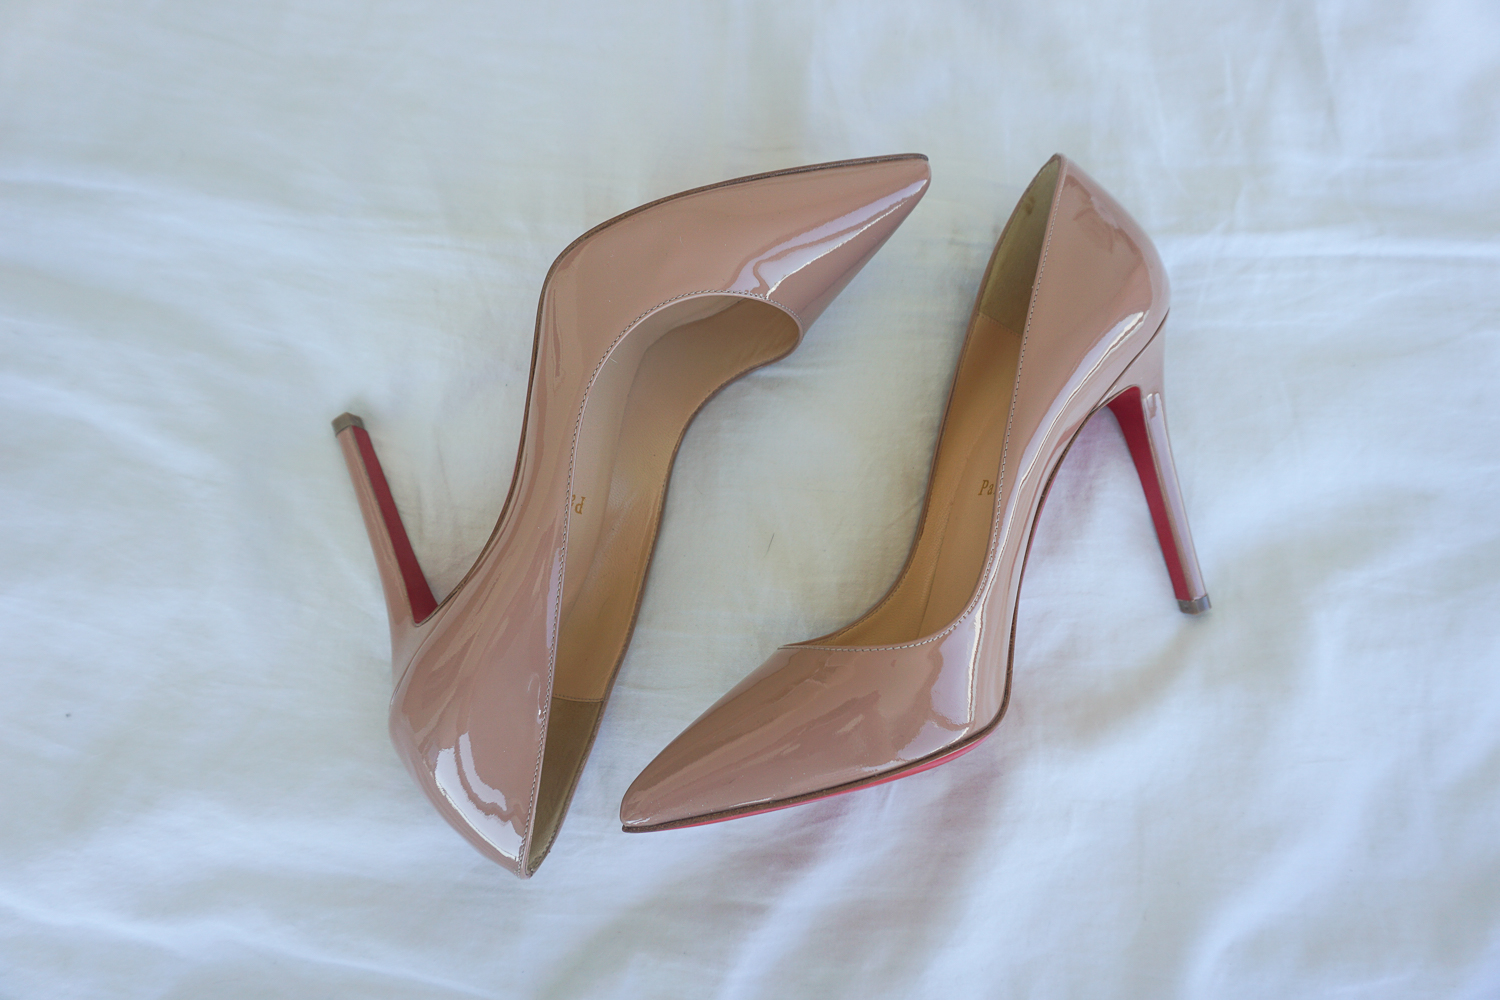 Christian Louboutin Heels Are Worth the Splurge; Here are 7 Reasons Why